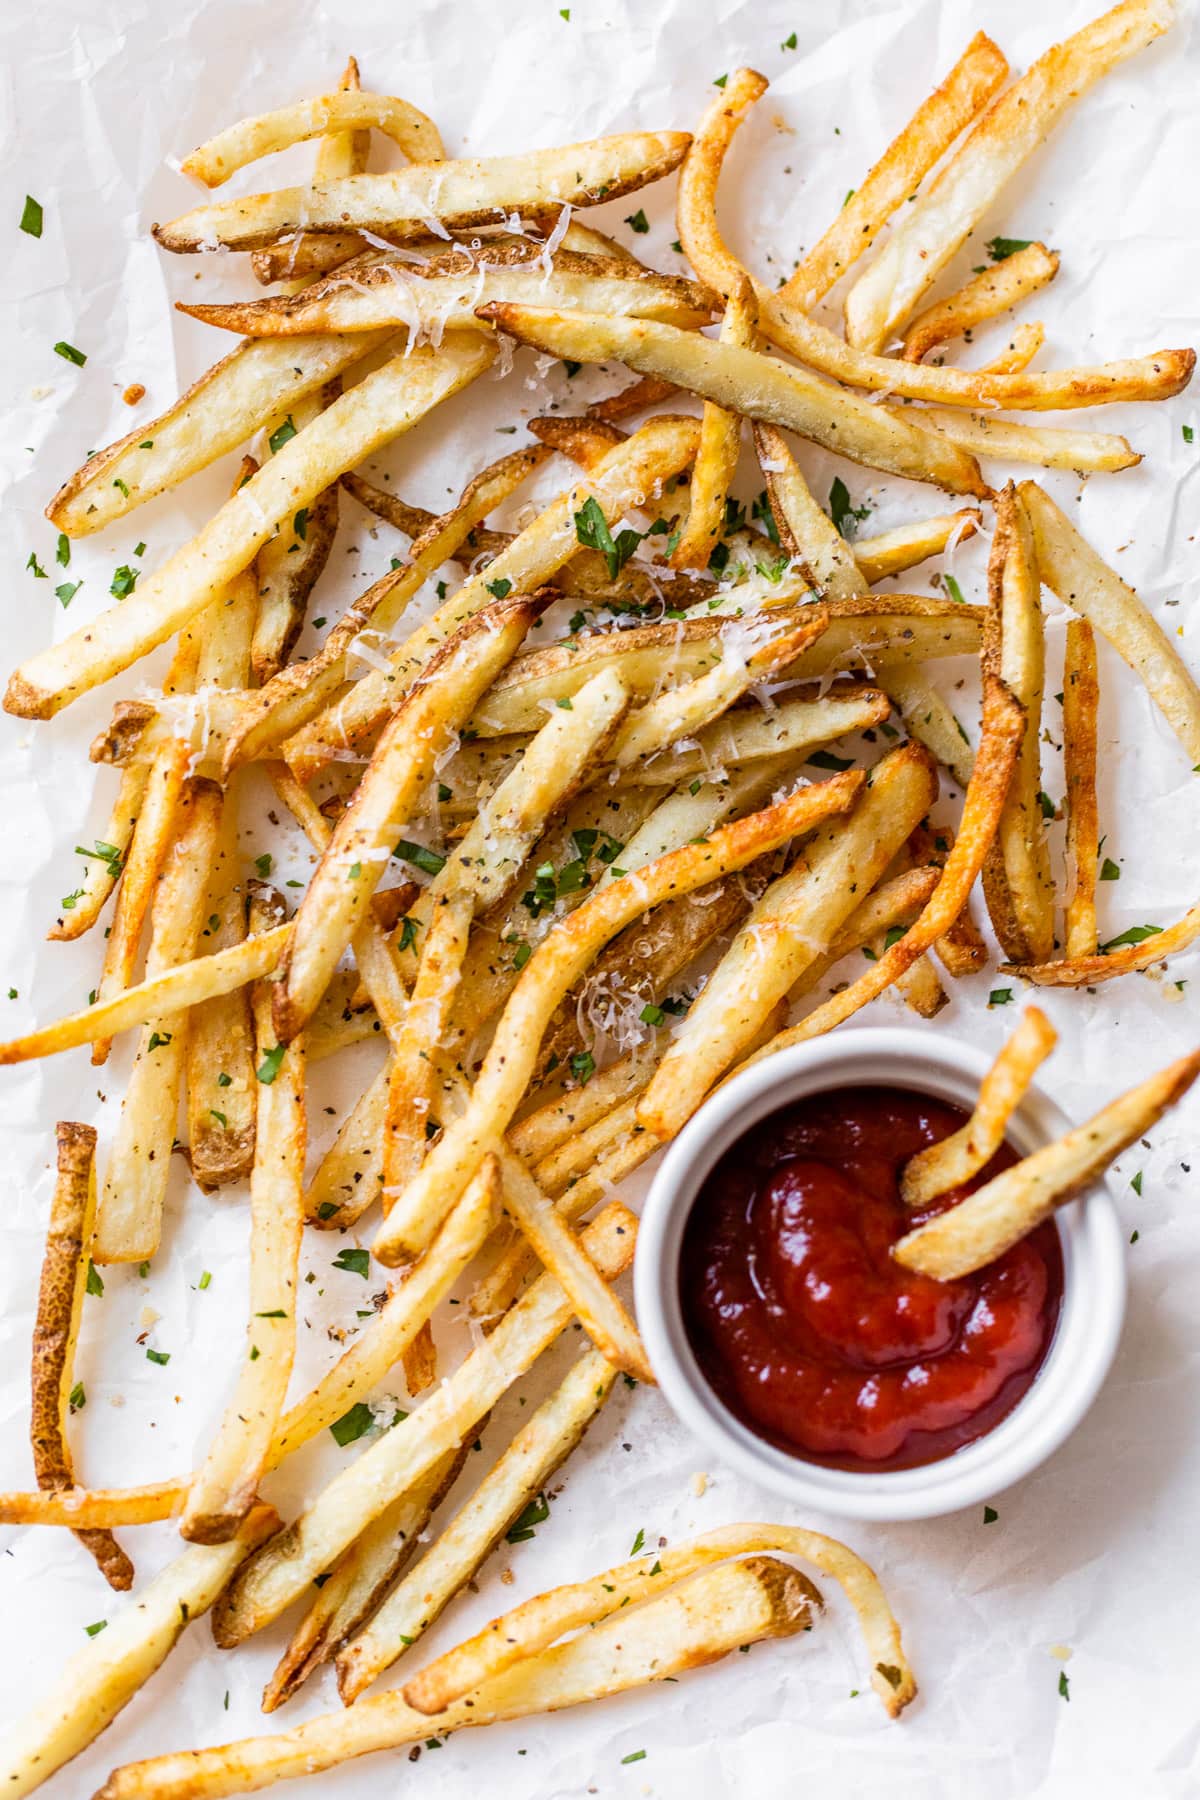 Crispy air fryer french fries with ketchup